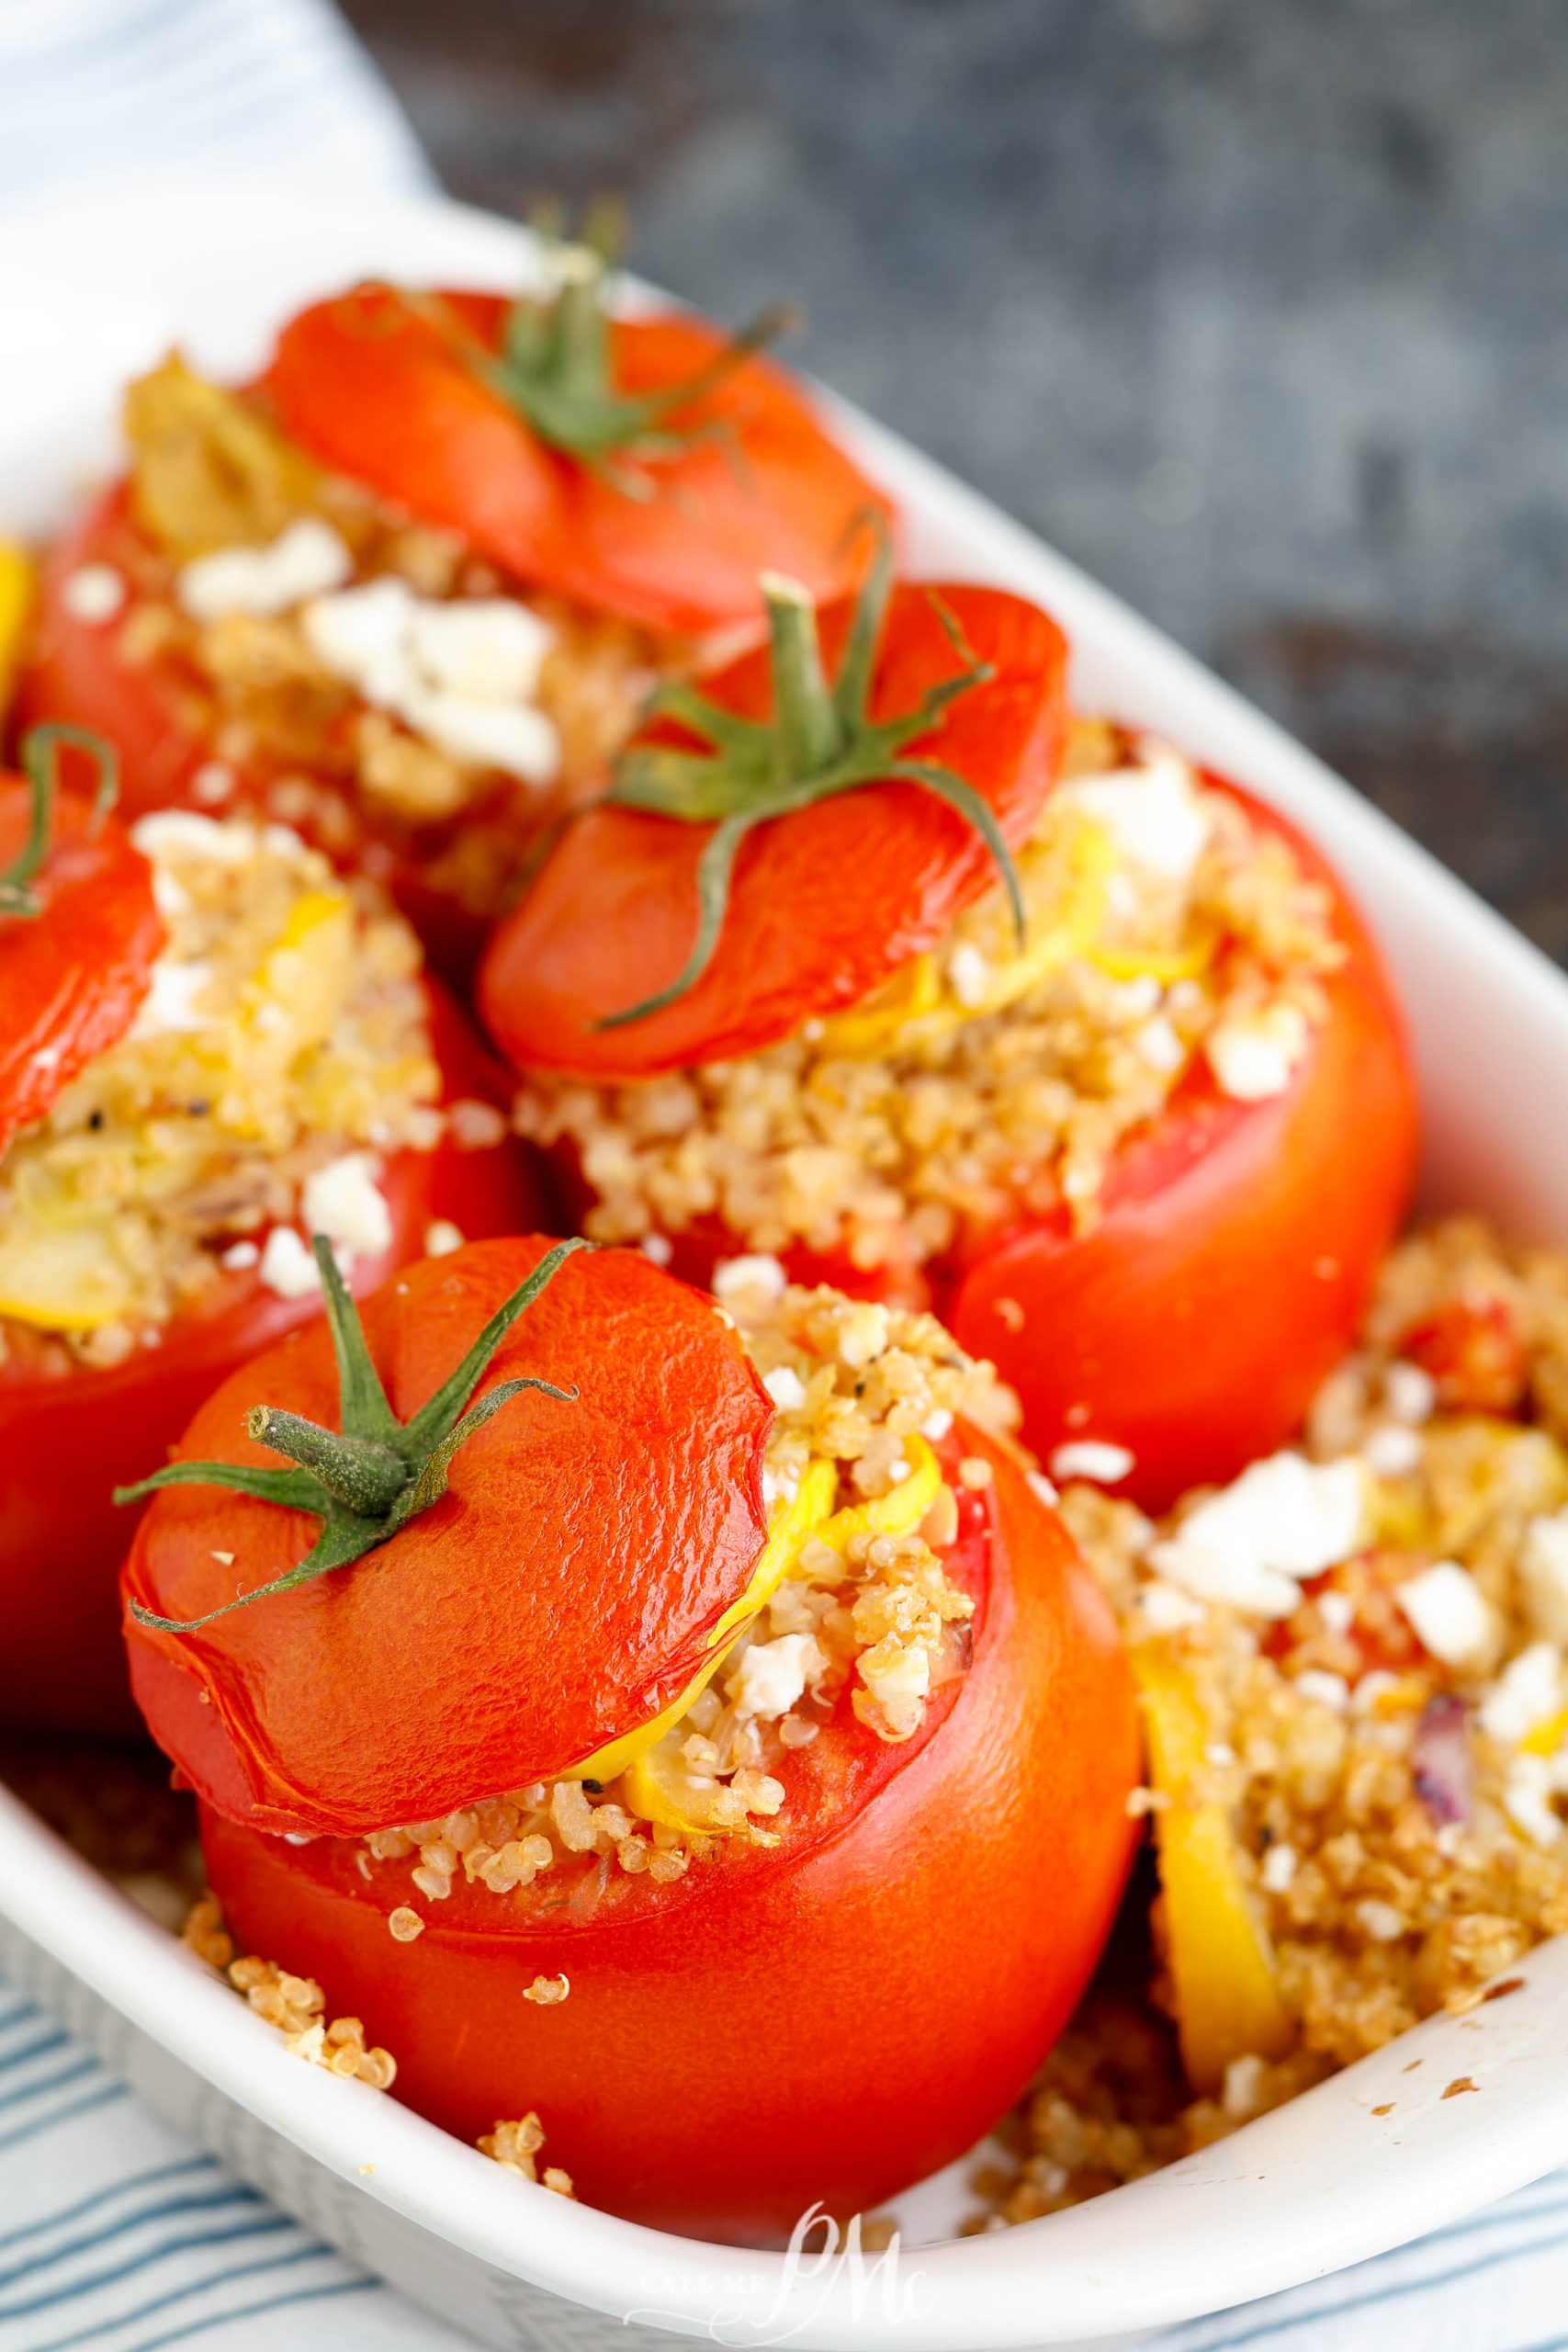 tomatoes baked and filled.